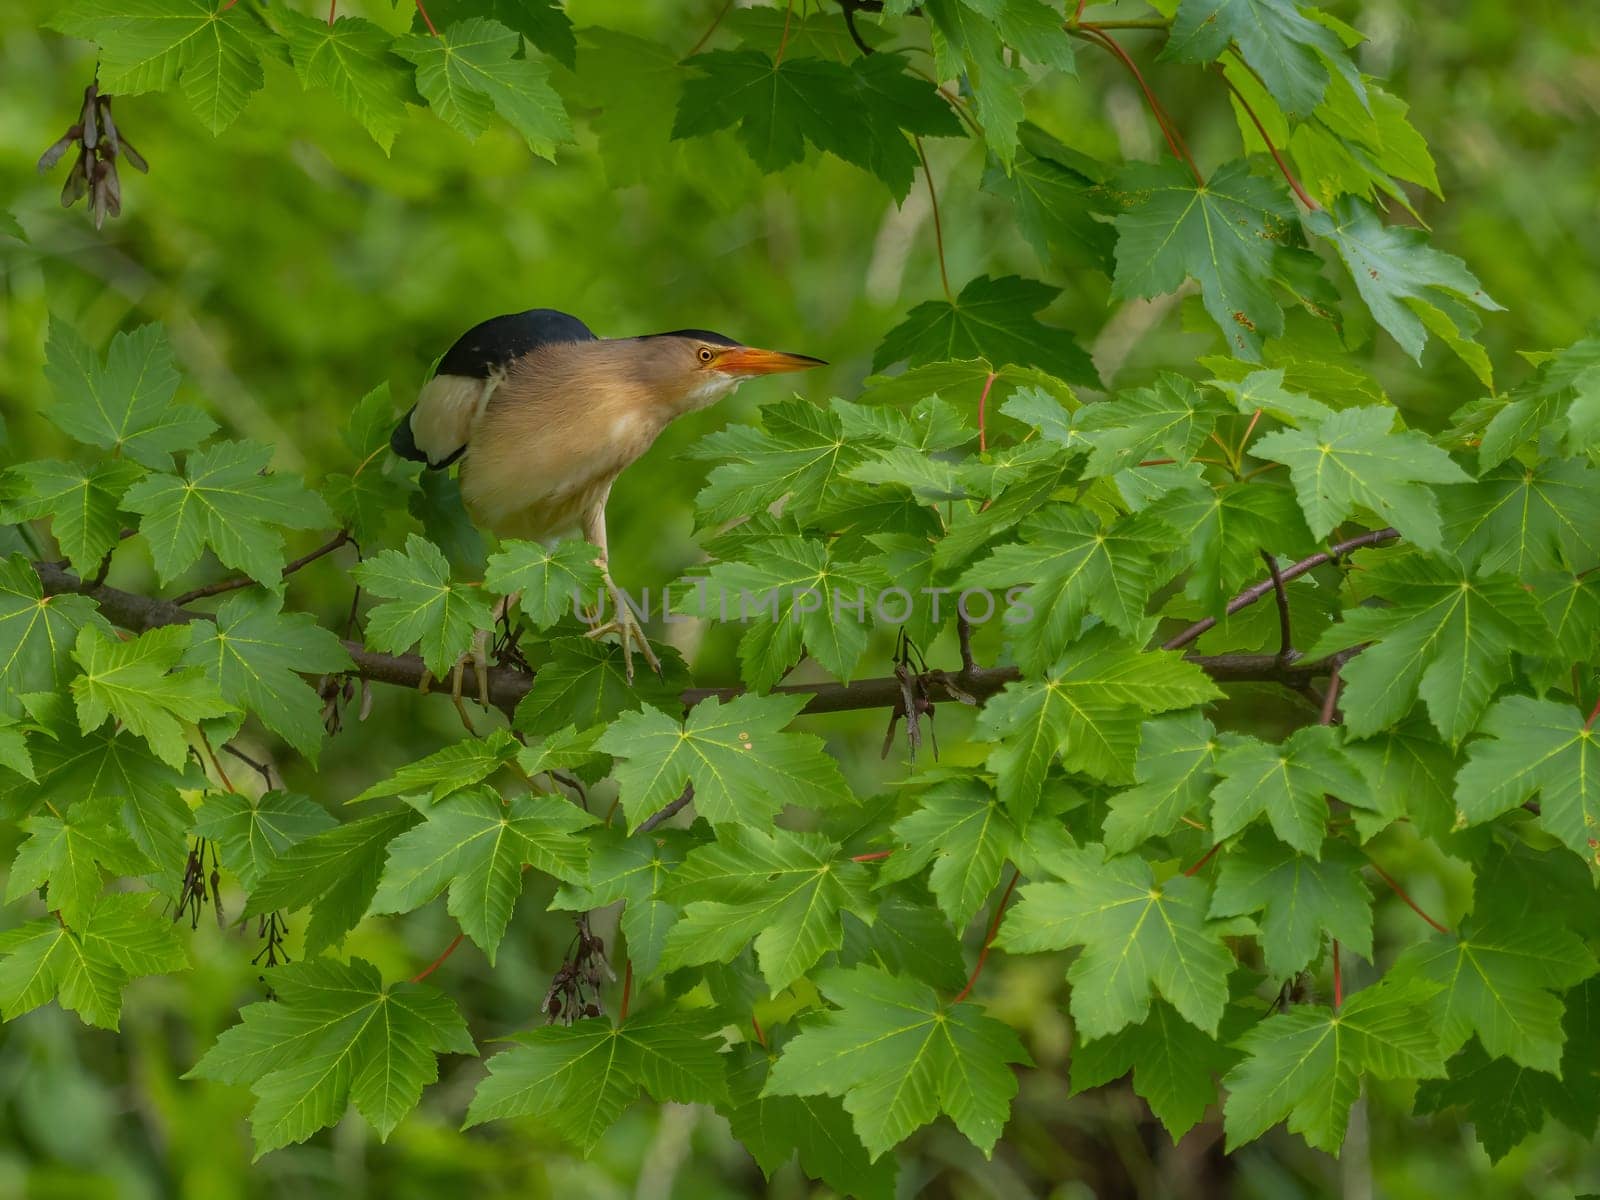 Little Bittern perched on a branch, its vibrant feathers beautifully contrasting against the lush green maple leaves.